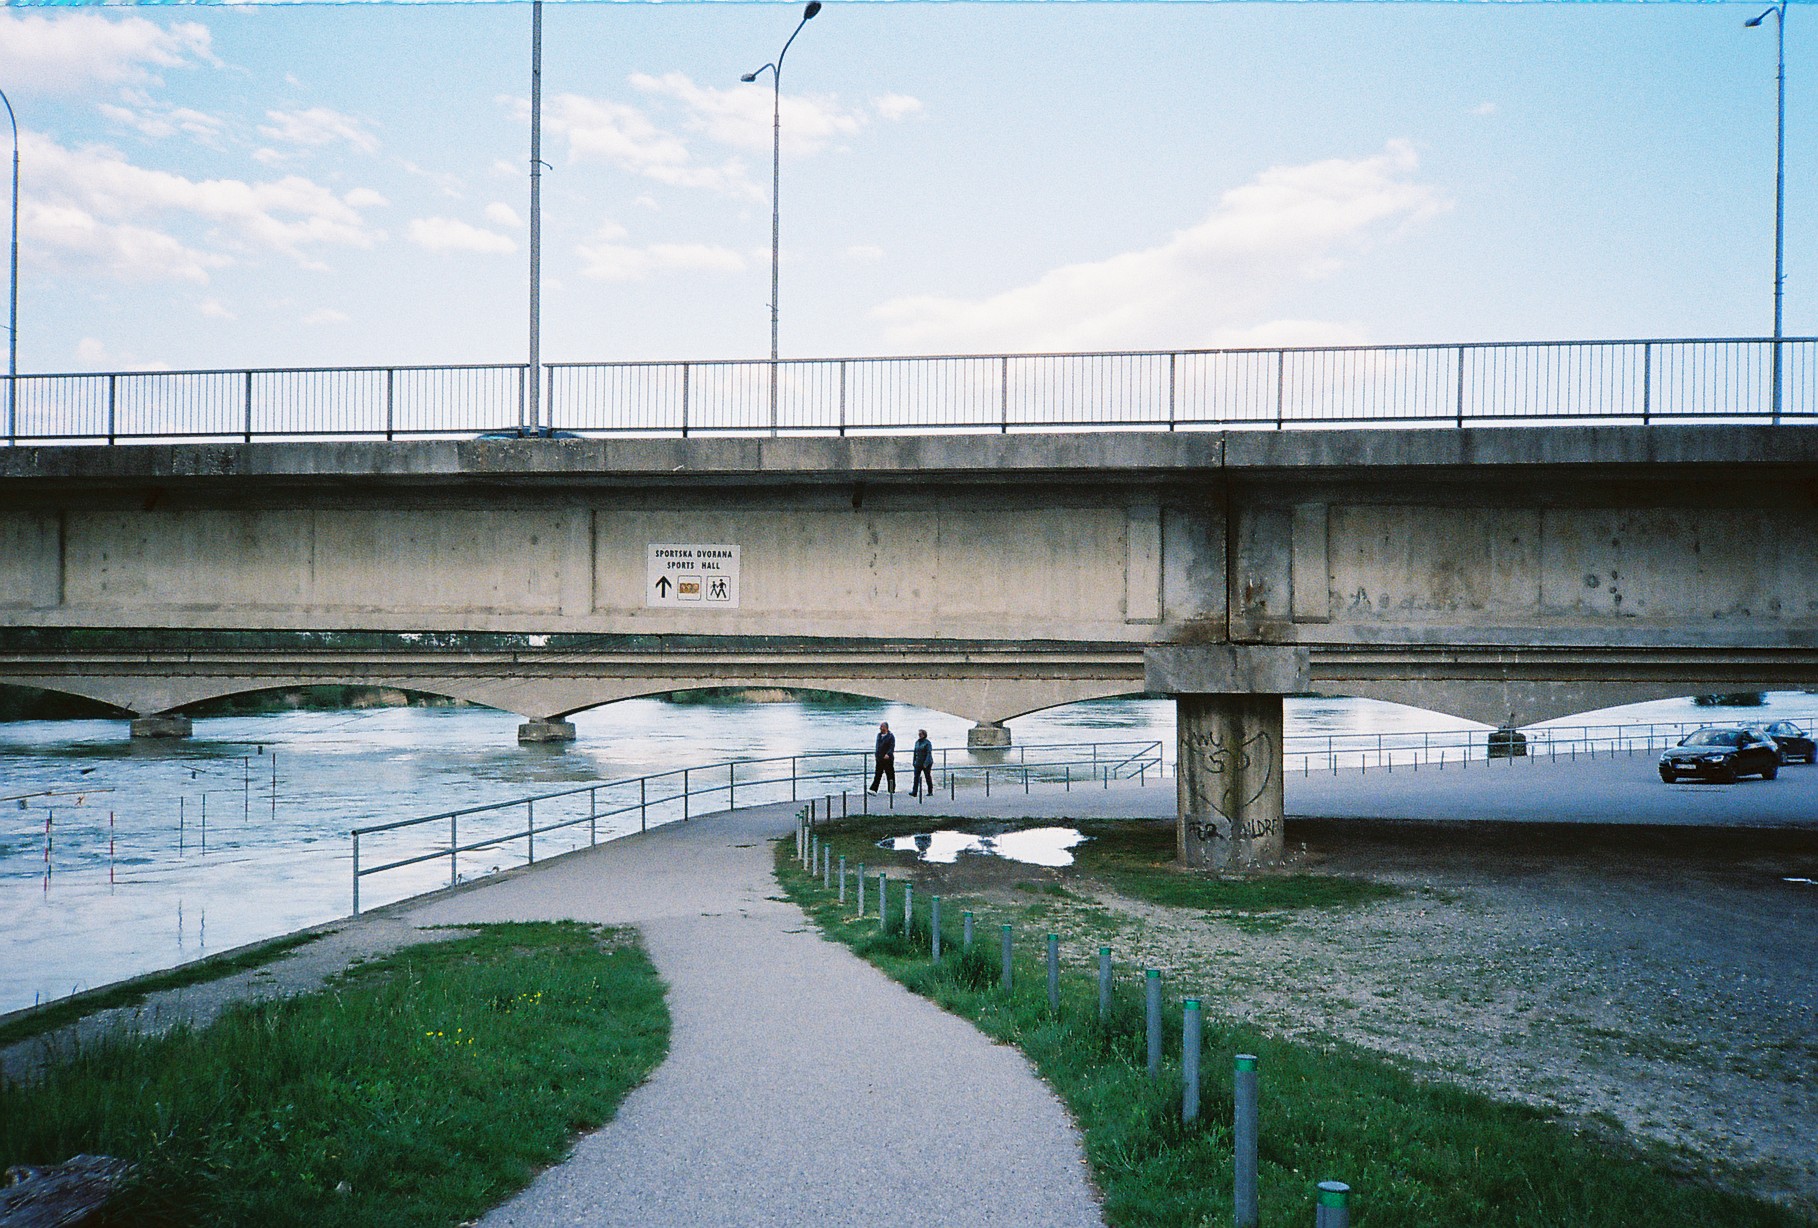 Under the brige on the banks of the River Drava in Varaždin, Croatia